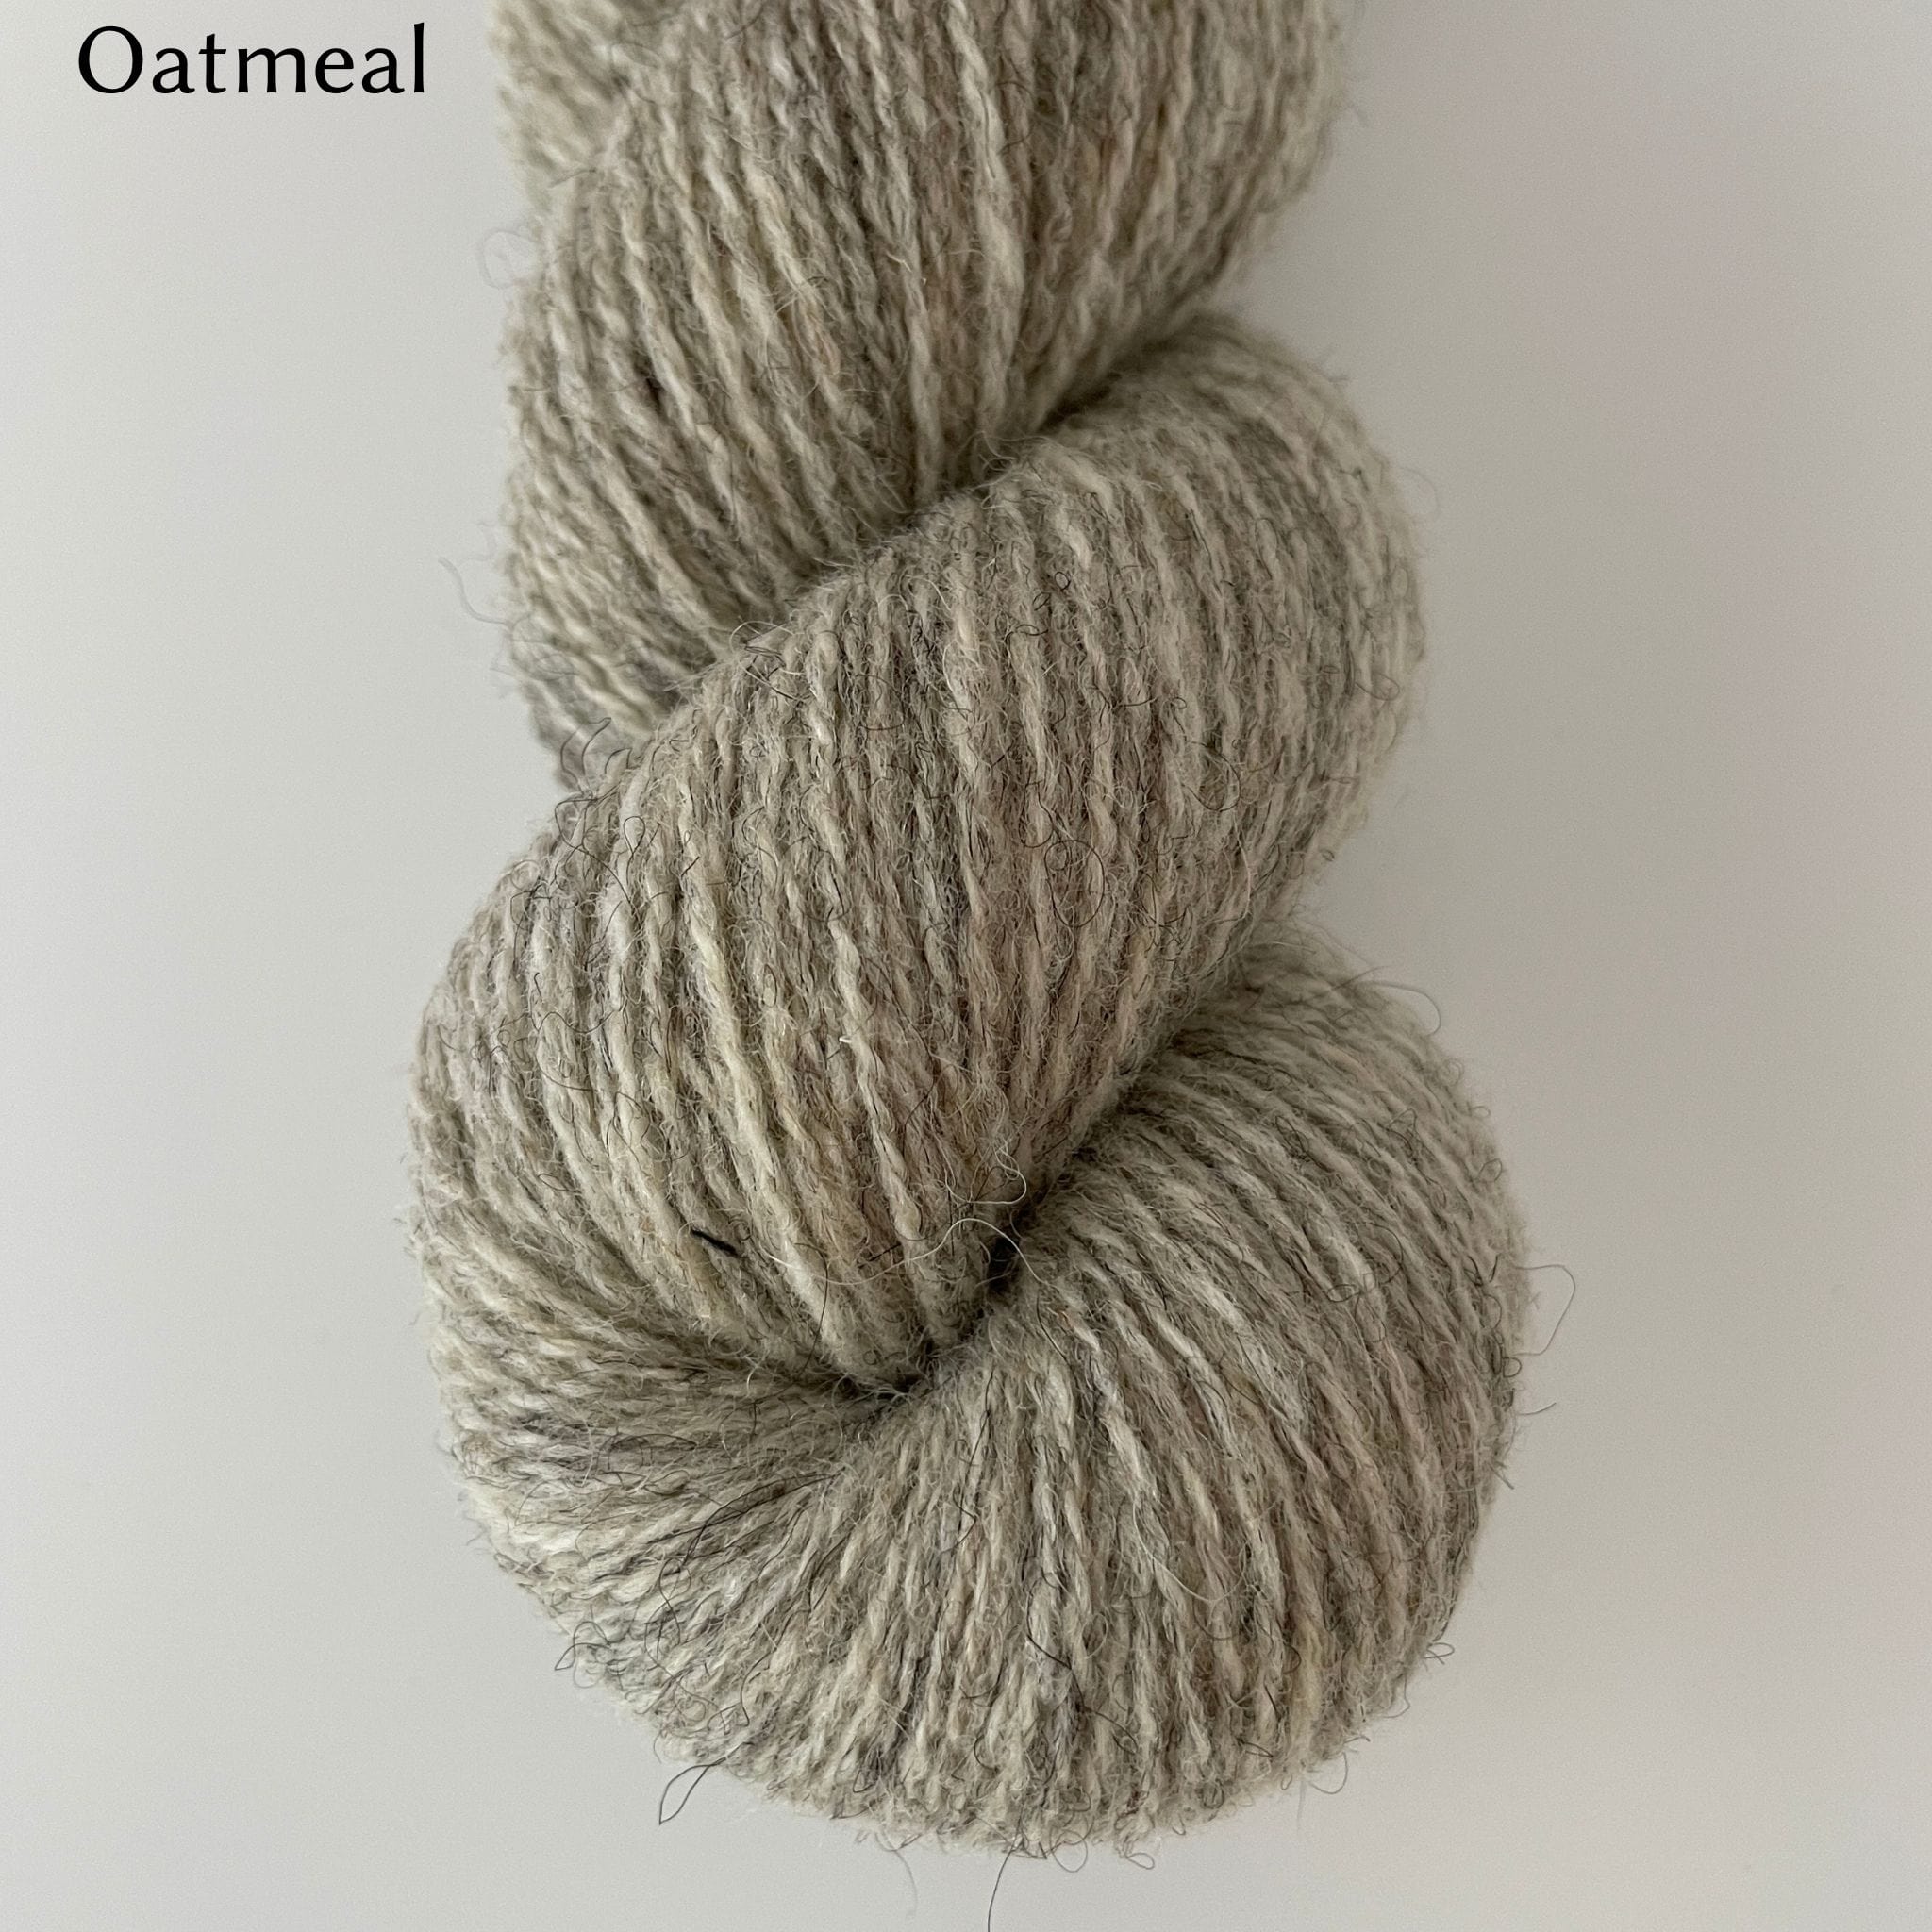 Naturally Colored Worsted Yarn - Pewter & Silver